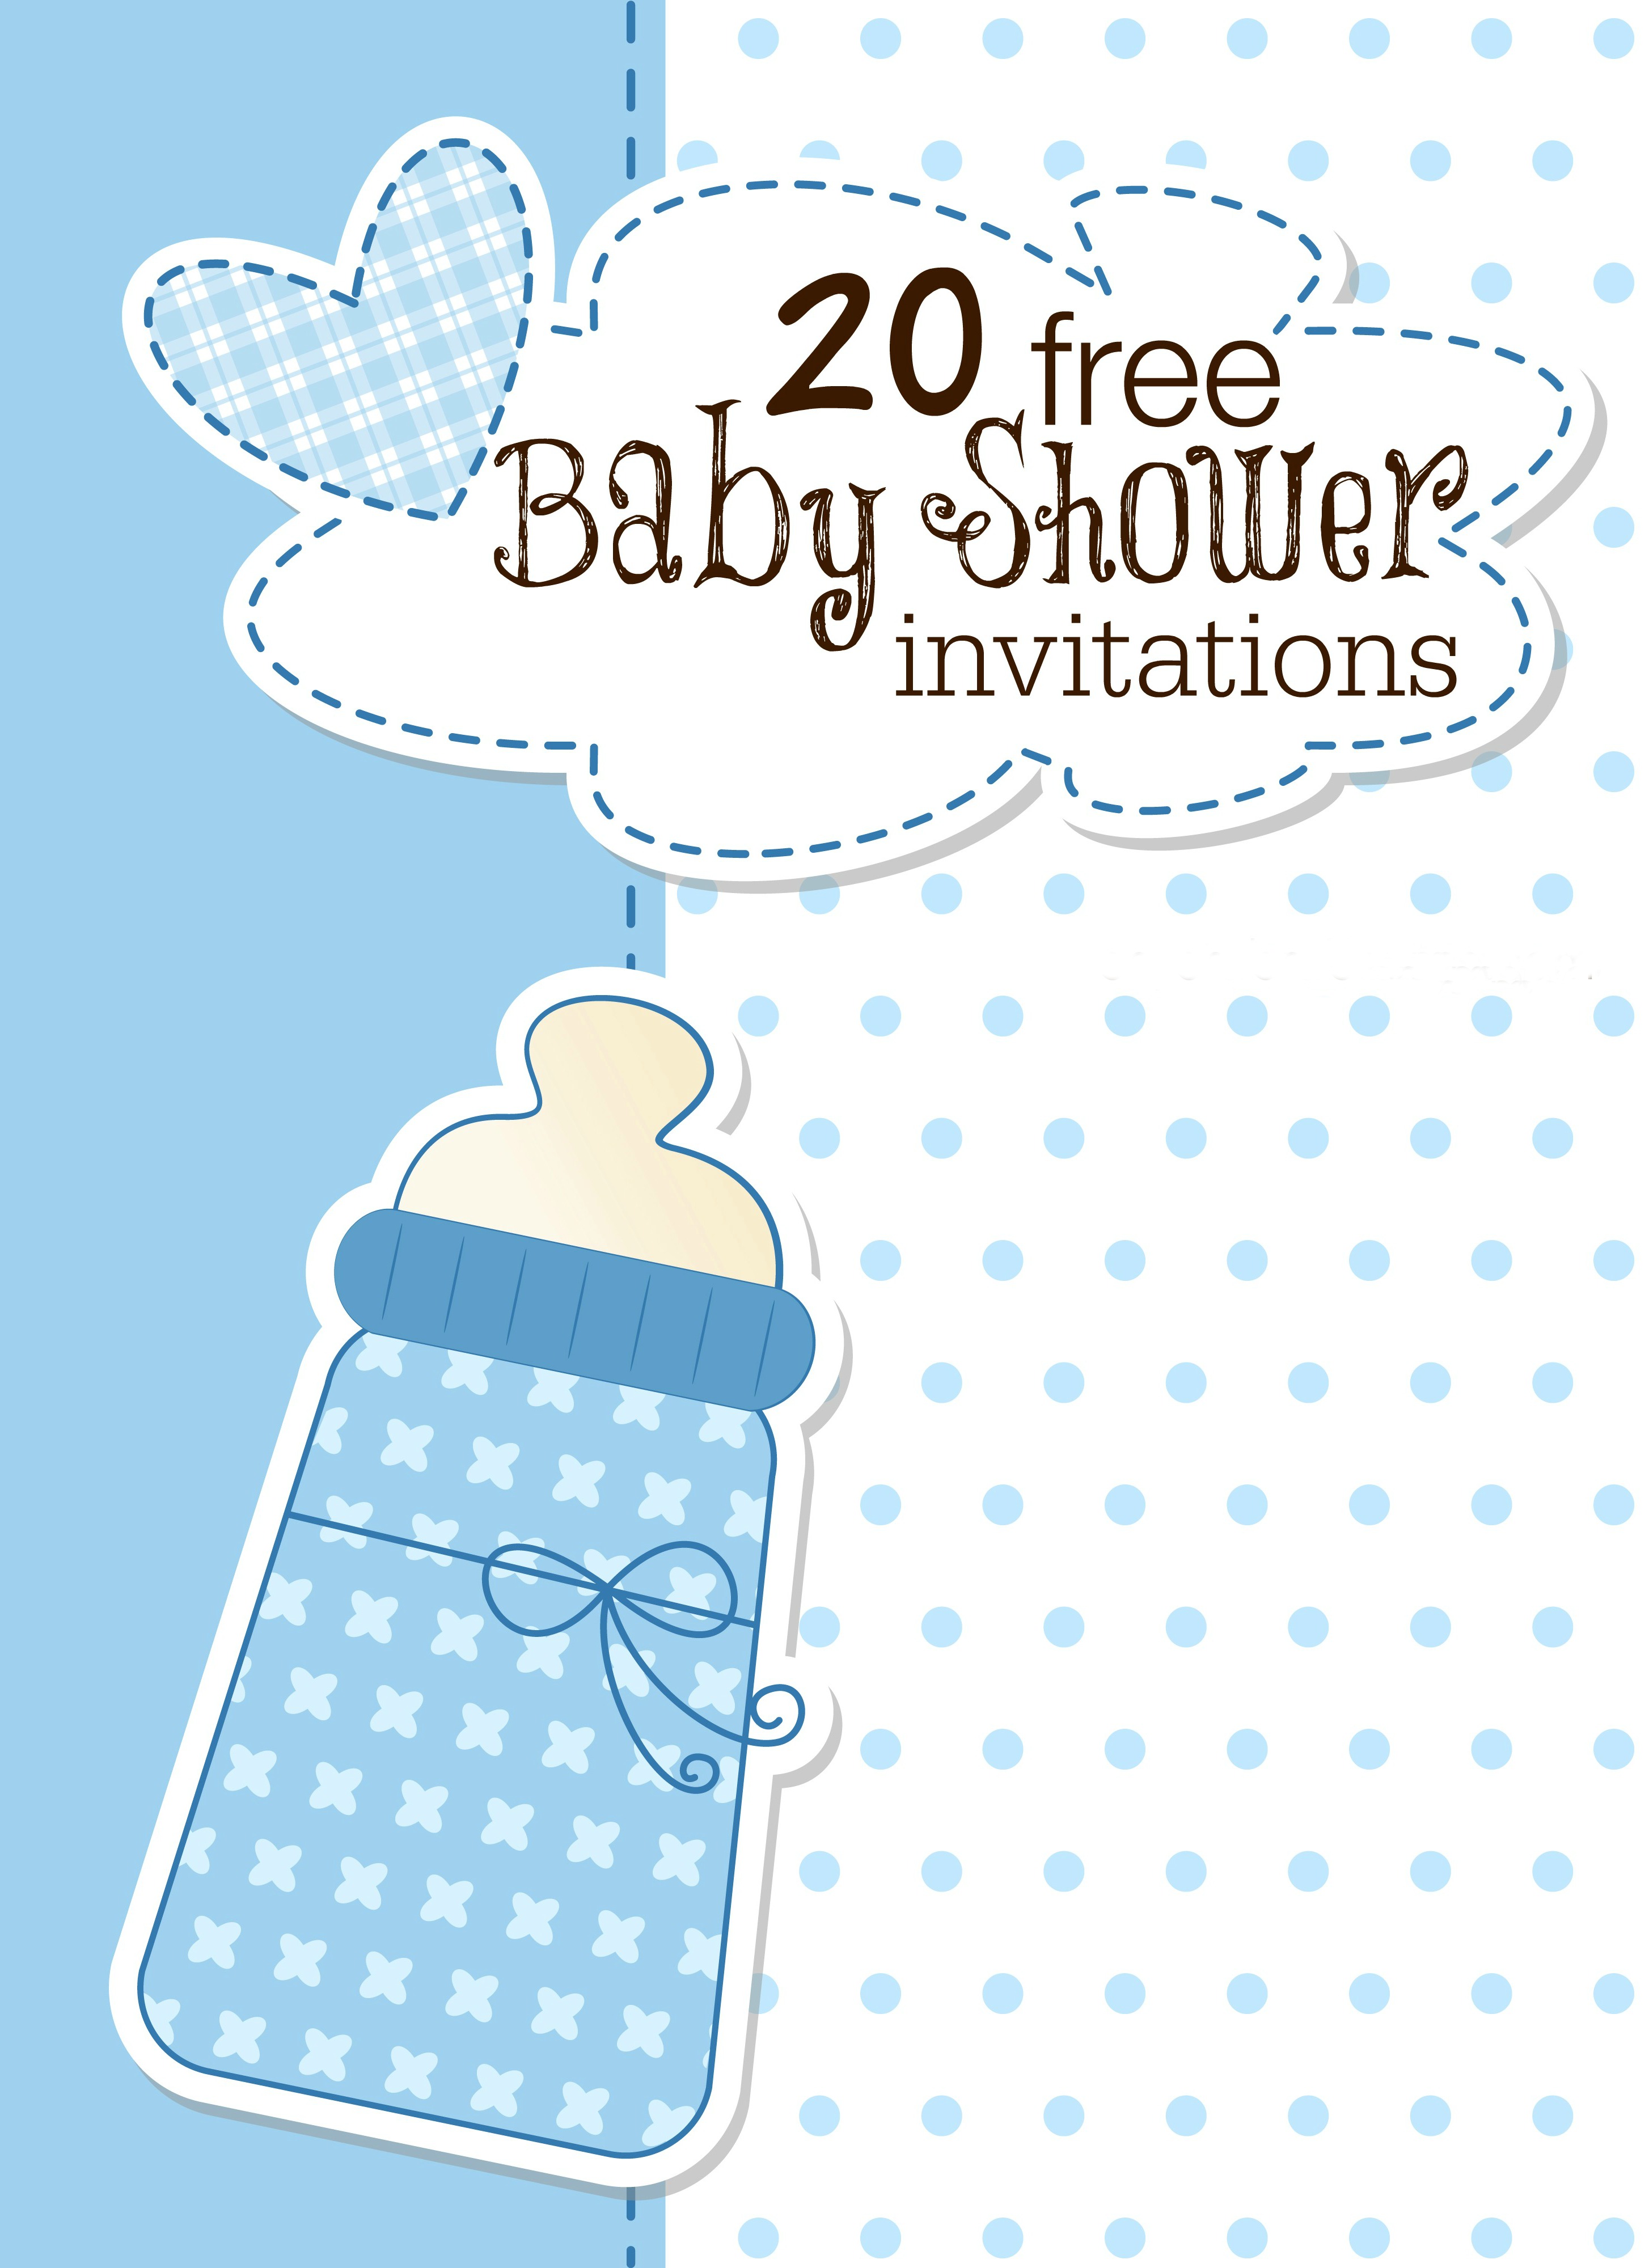 Full Size of Baby Shower:cheap Invitations Baby Shower Pinterest Baby Shower Ideas For Girls Baby Girl Themed Showers Pinterest Nursery Ideas Nautical Baby Shower Invitations For Boys Baby Girl Themes For Bedroom Baby Shower Ideas Baby Shower Decorations Themes For Baby Girl Nursery